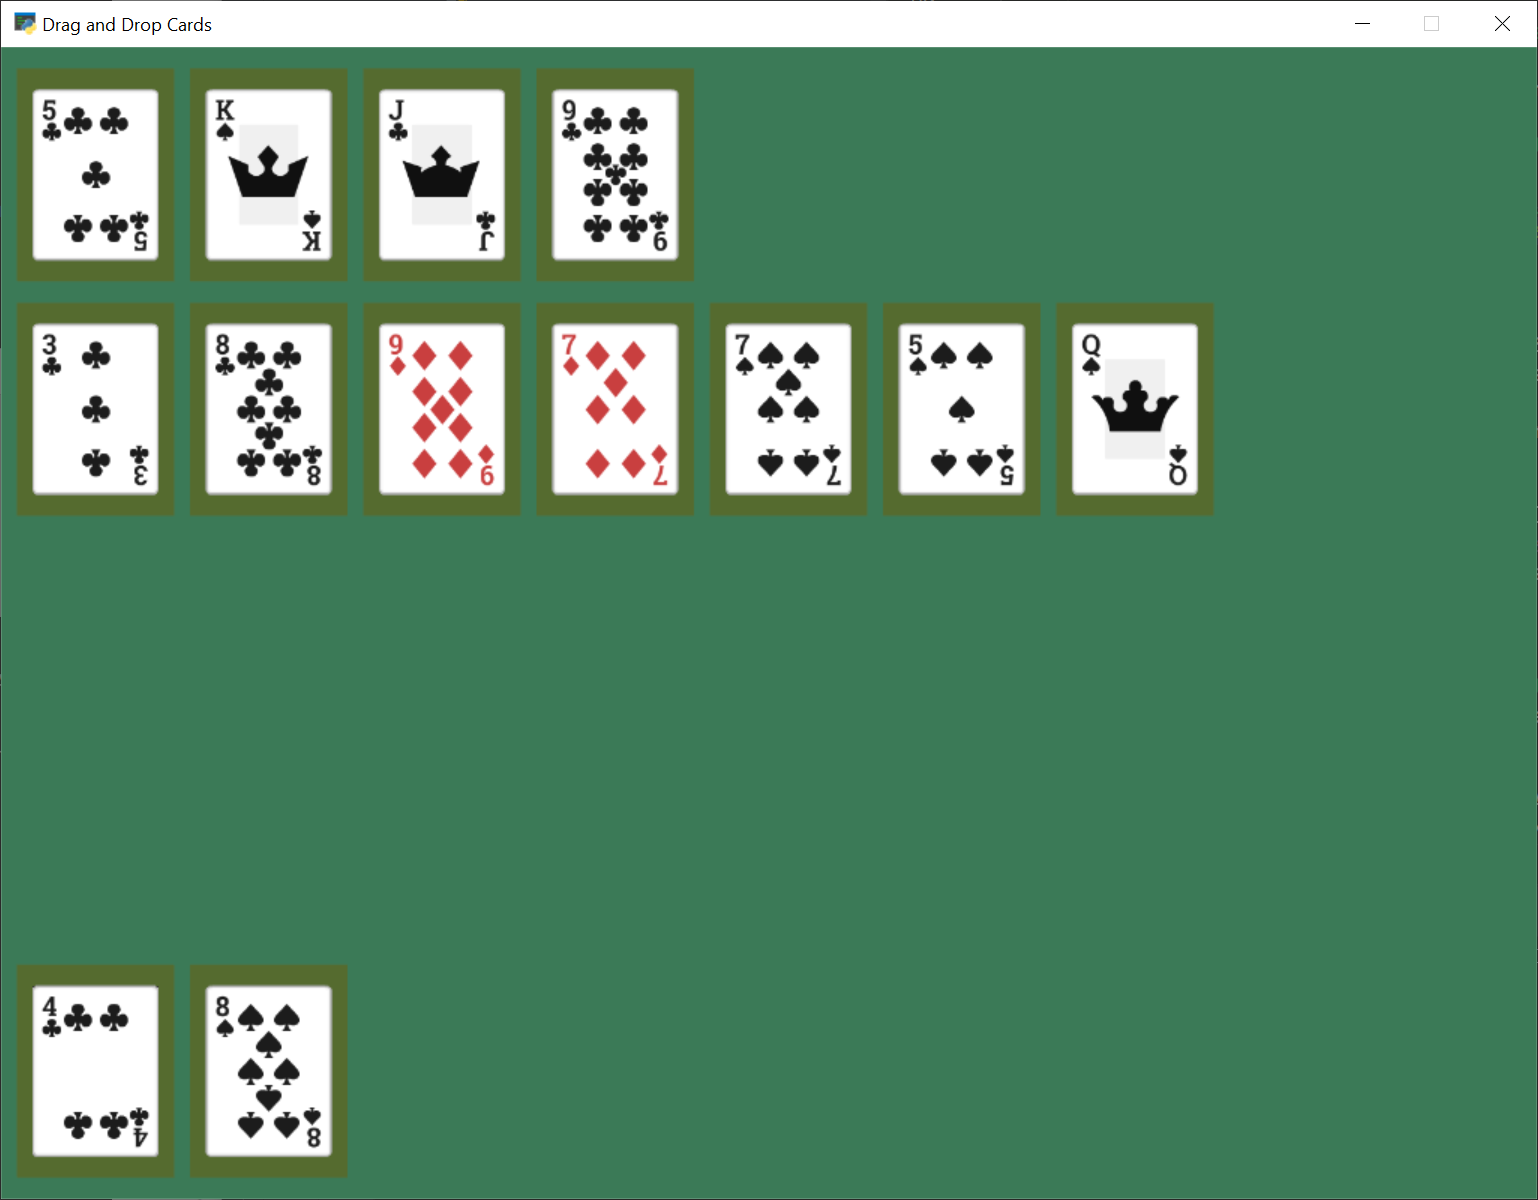 ../../_images/solitaire_06.png